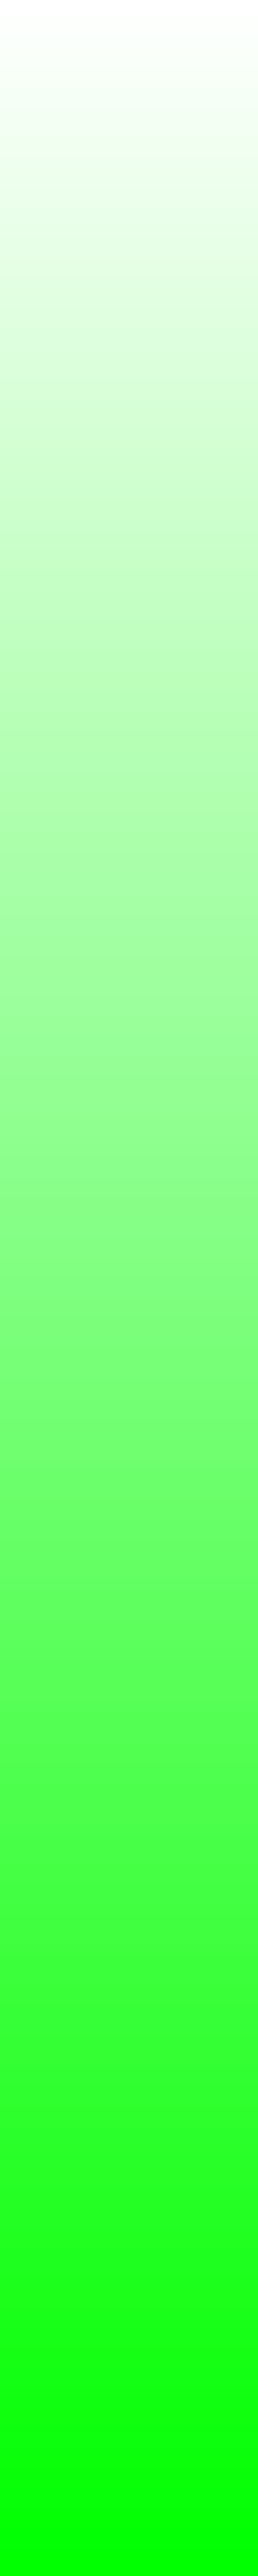 Ws Gradient Lime